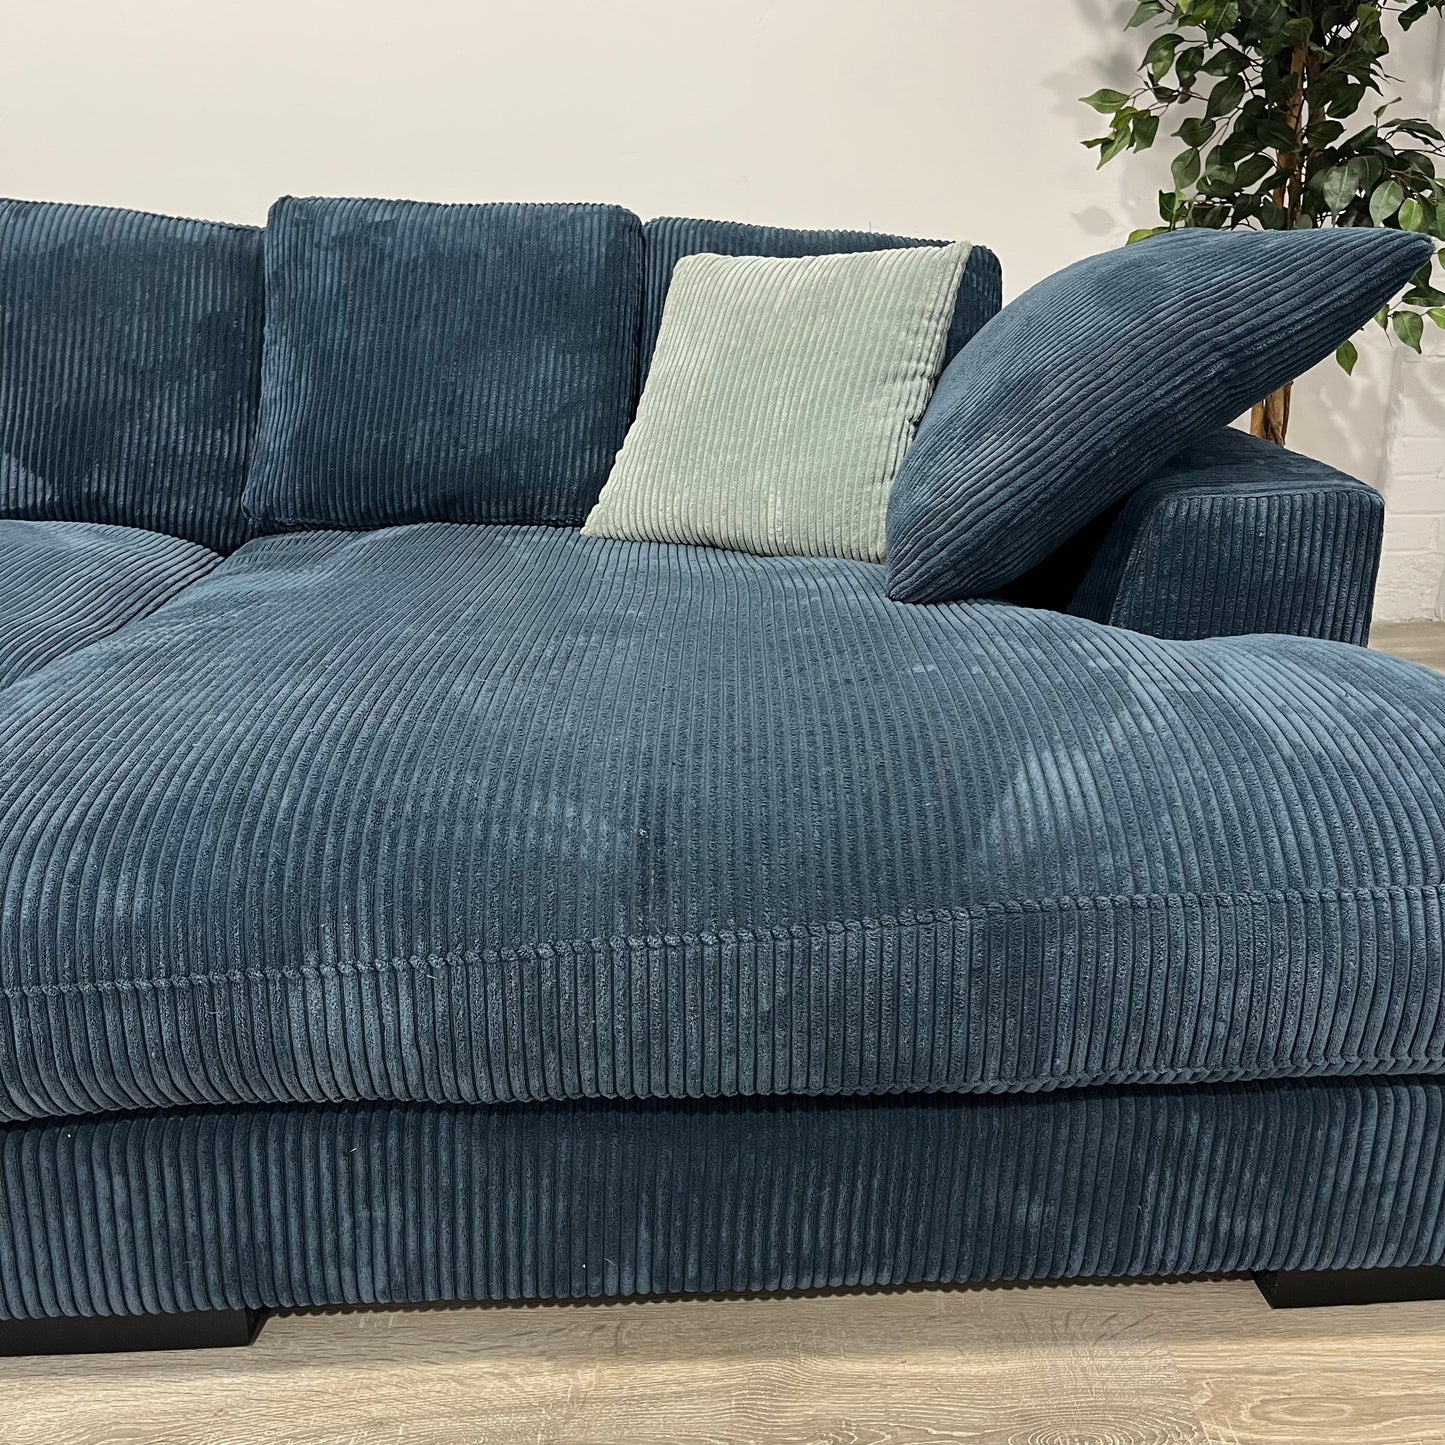 The Plunge Sectional